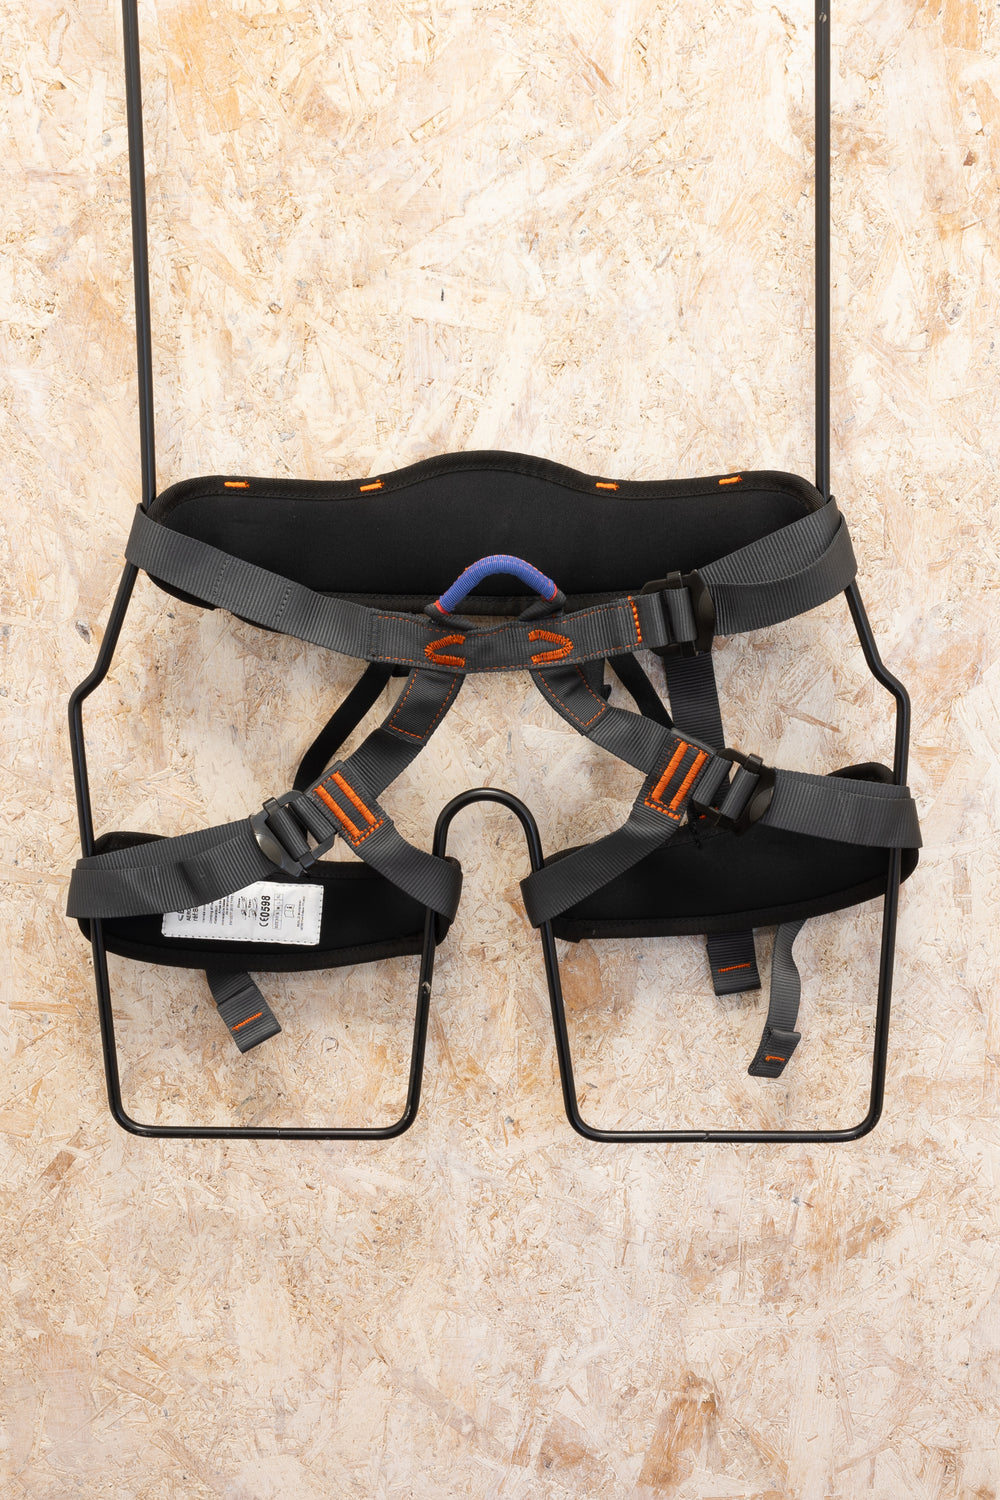 Beal - AeroTeam IV Harness (One Size)